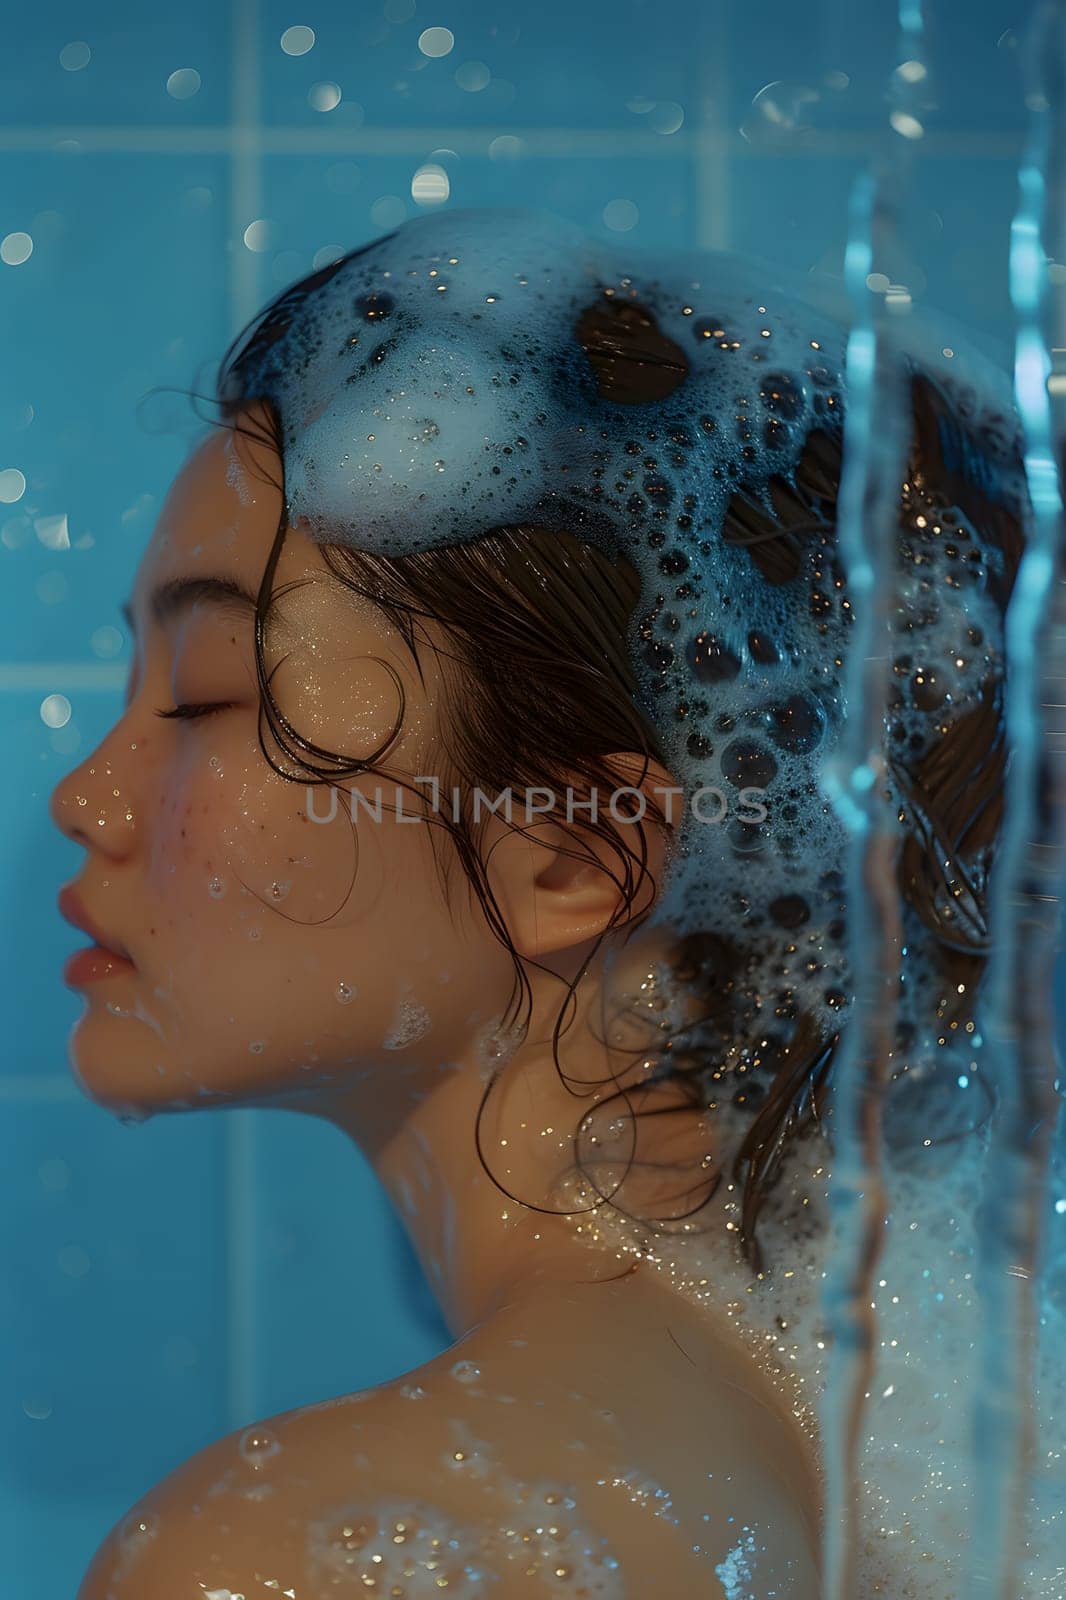 A woman leisurely showers, soap bubbles decorating her hair. Liquid cascades down her jaw, neck, and throat, as water streams over her eyelashes